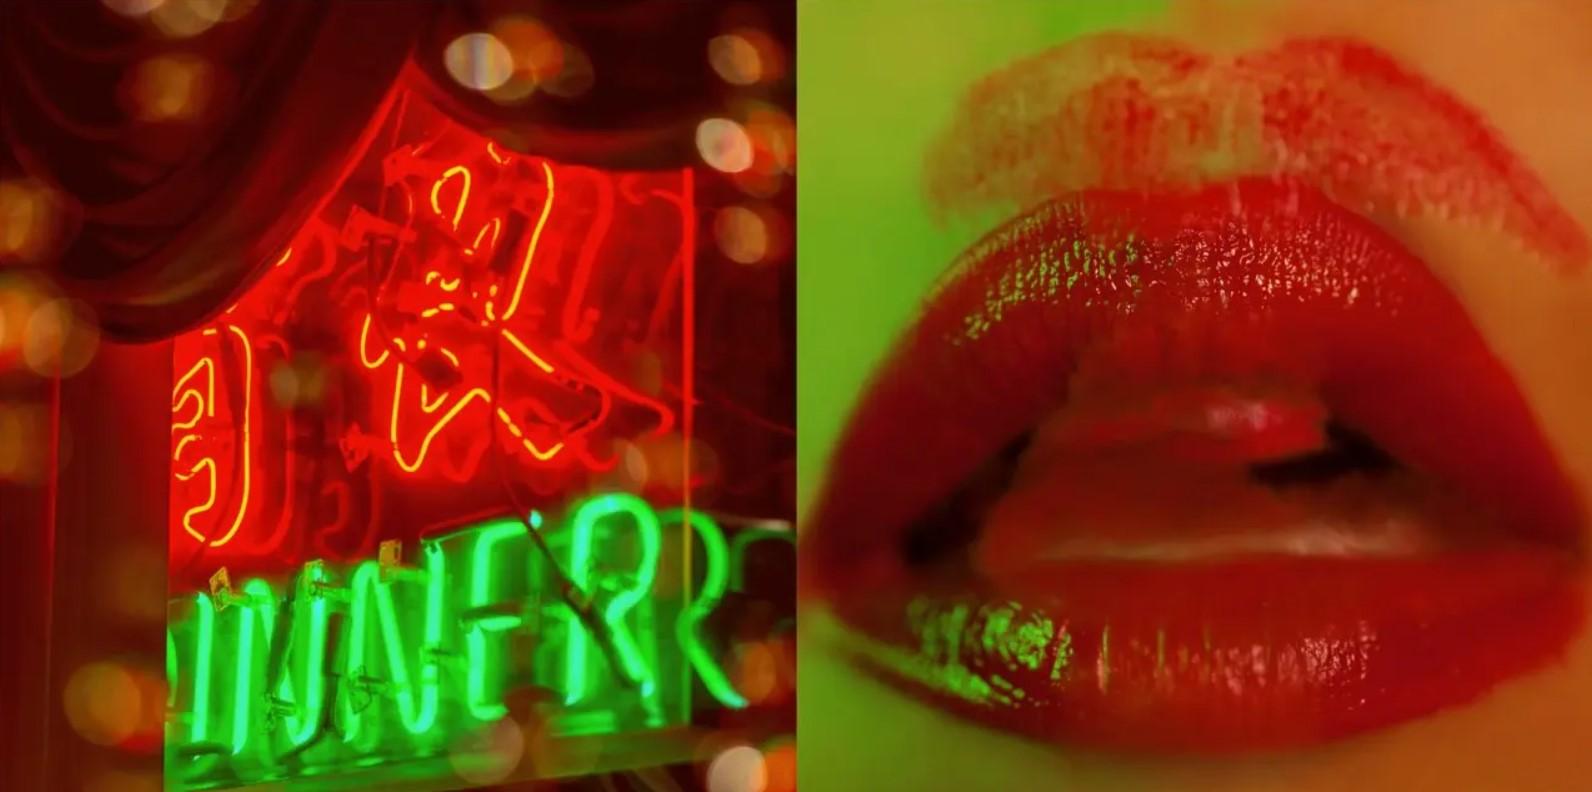 Guido Argentini Portrait Photograph - The things we don't say - woman with red lips and neon sign diptych